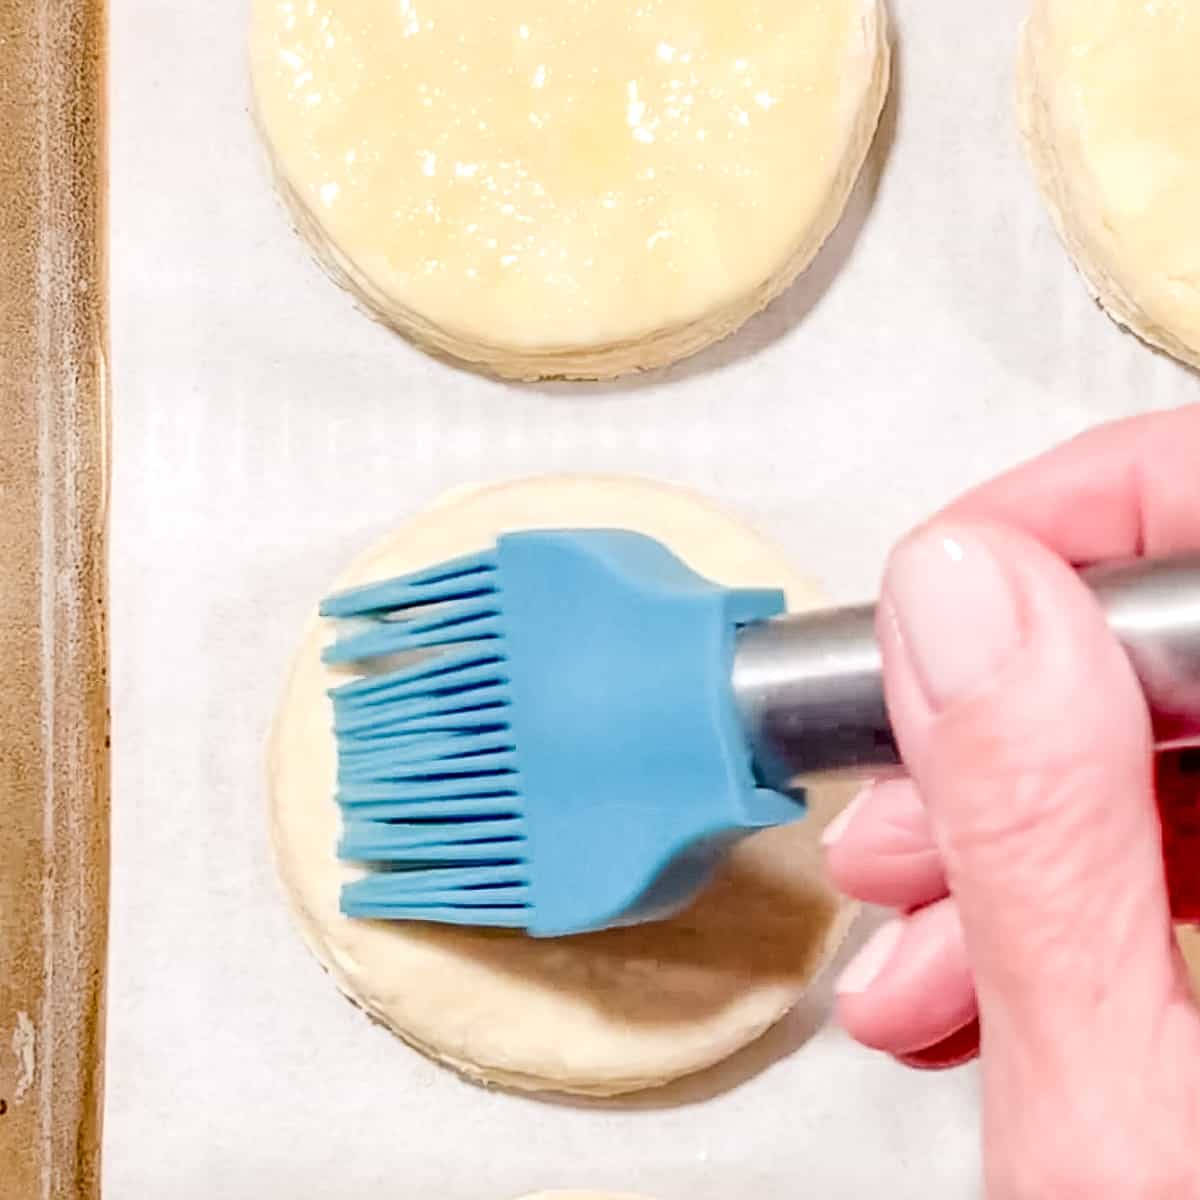 brushing egg wash on biscuits before baking.